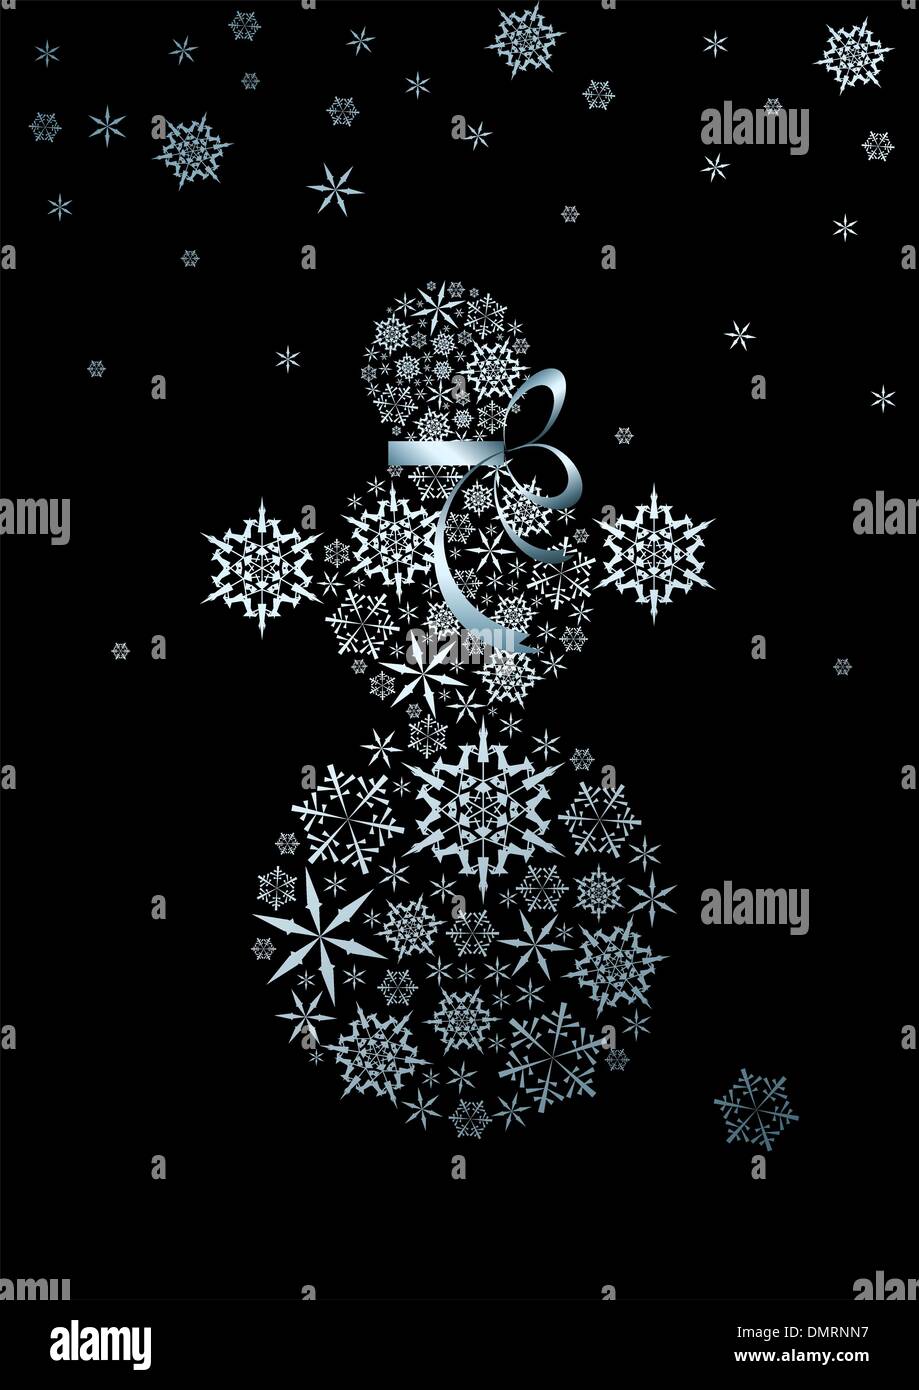 snowman made from silver snowflakes Stock Vector